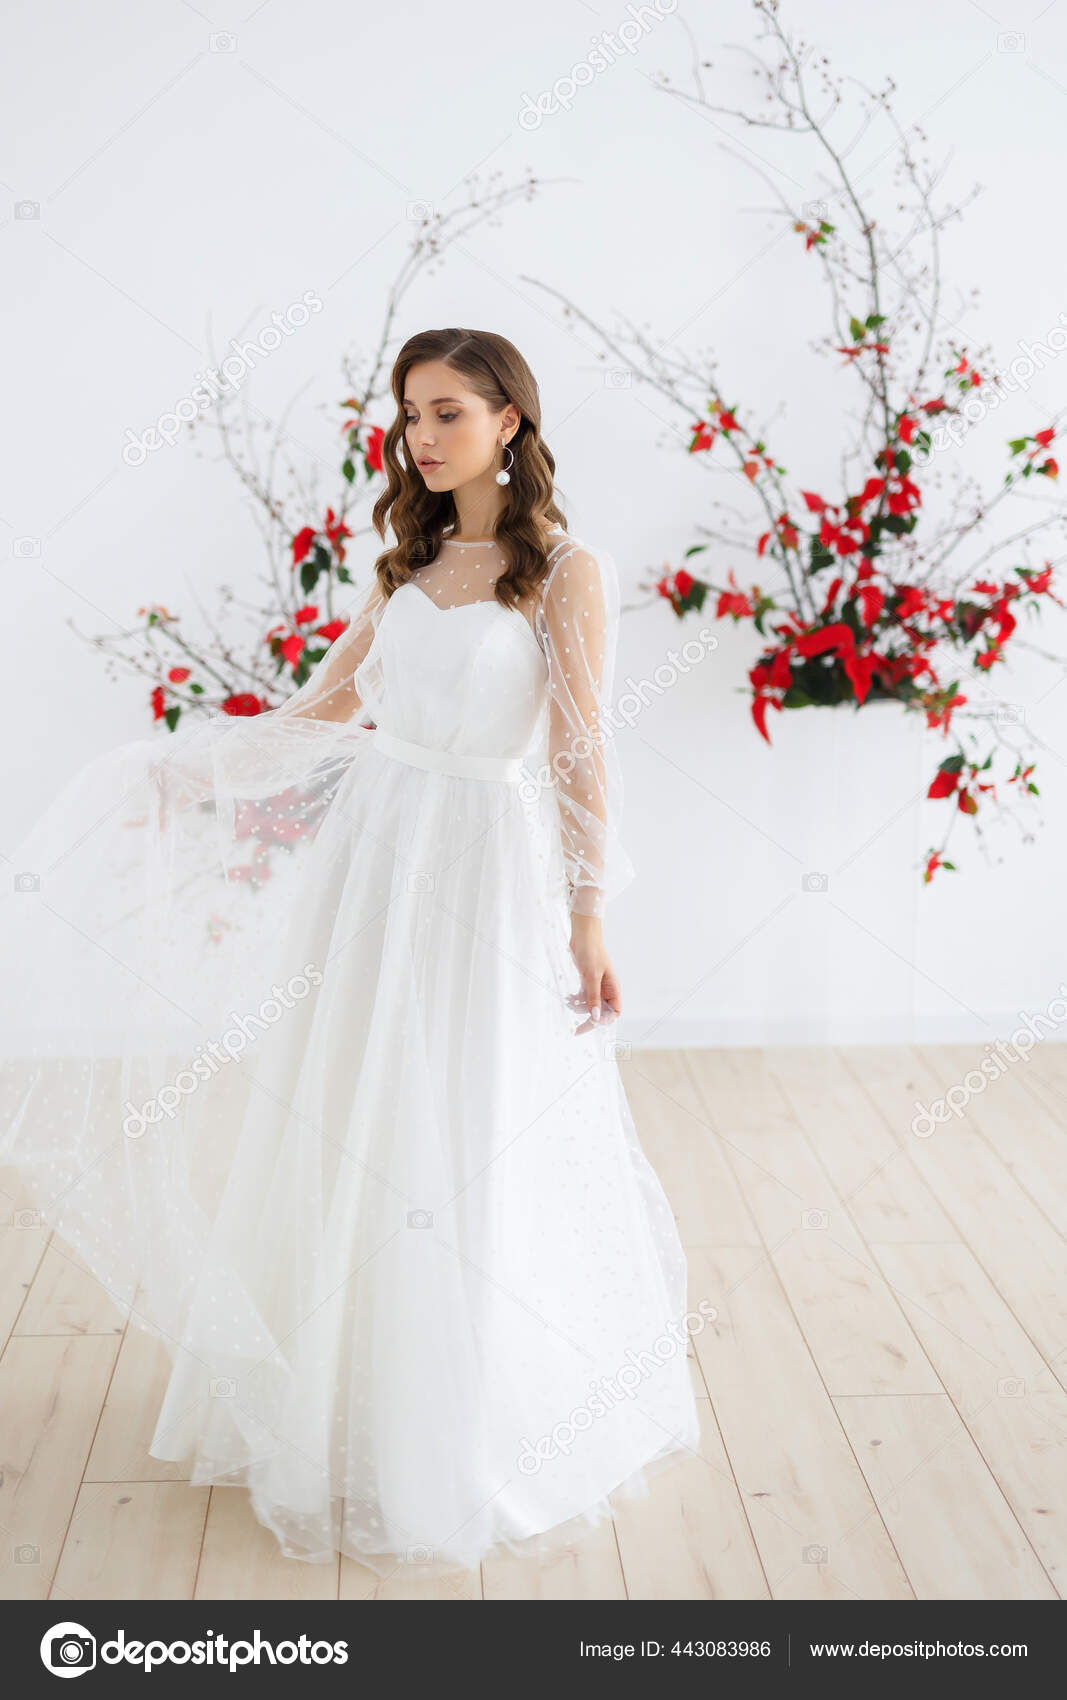 Bride in elegant white dress looking in the mirror. The bride smiles and  poses in front